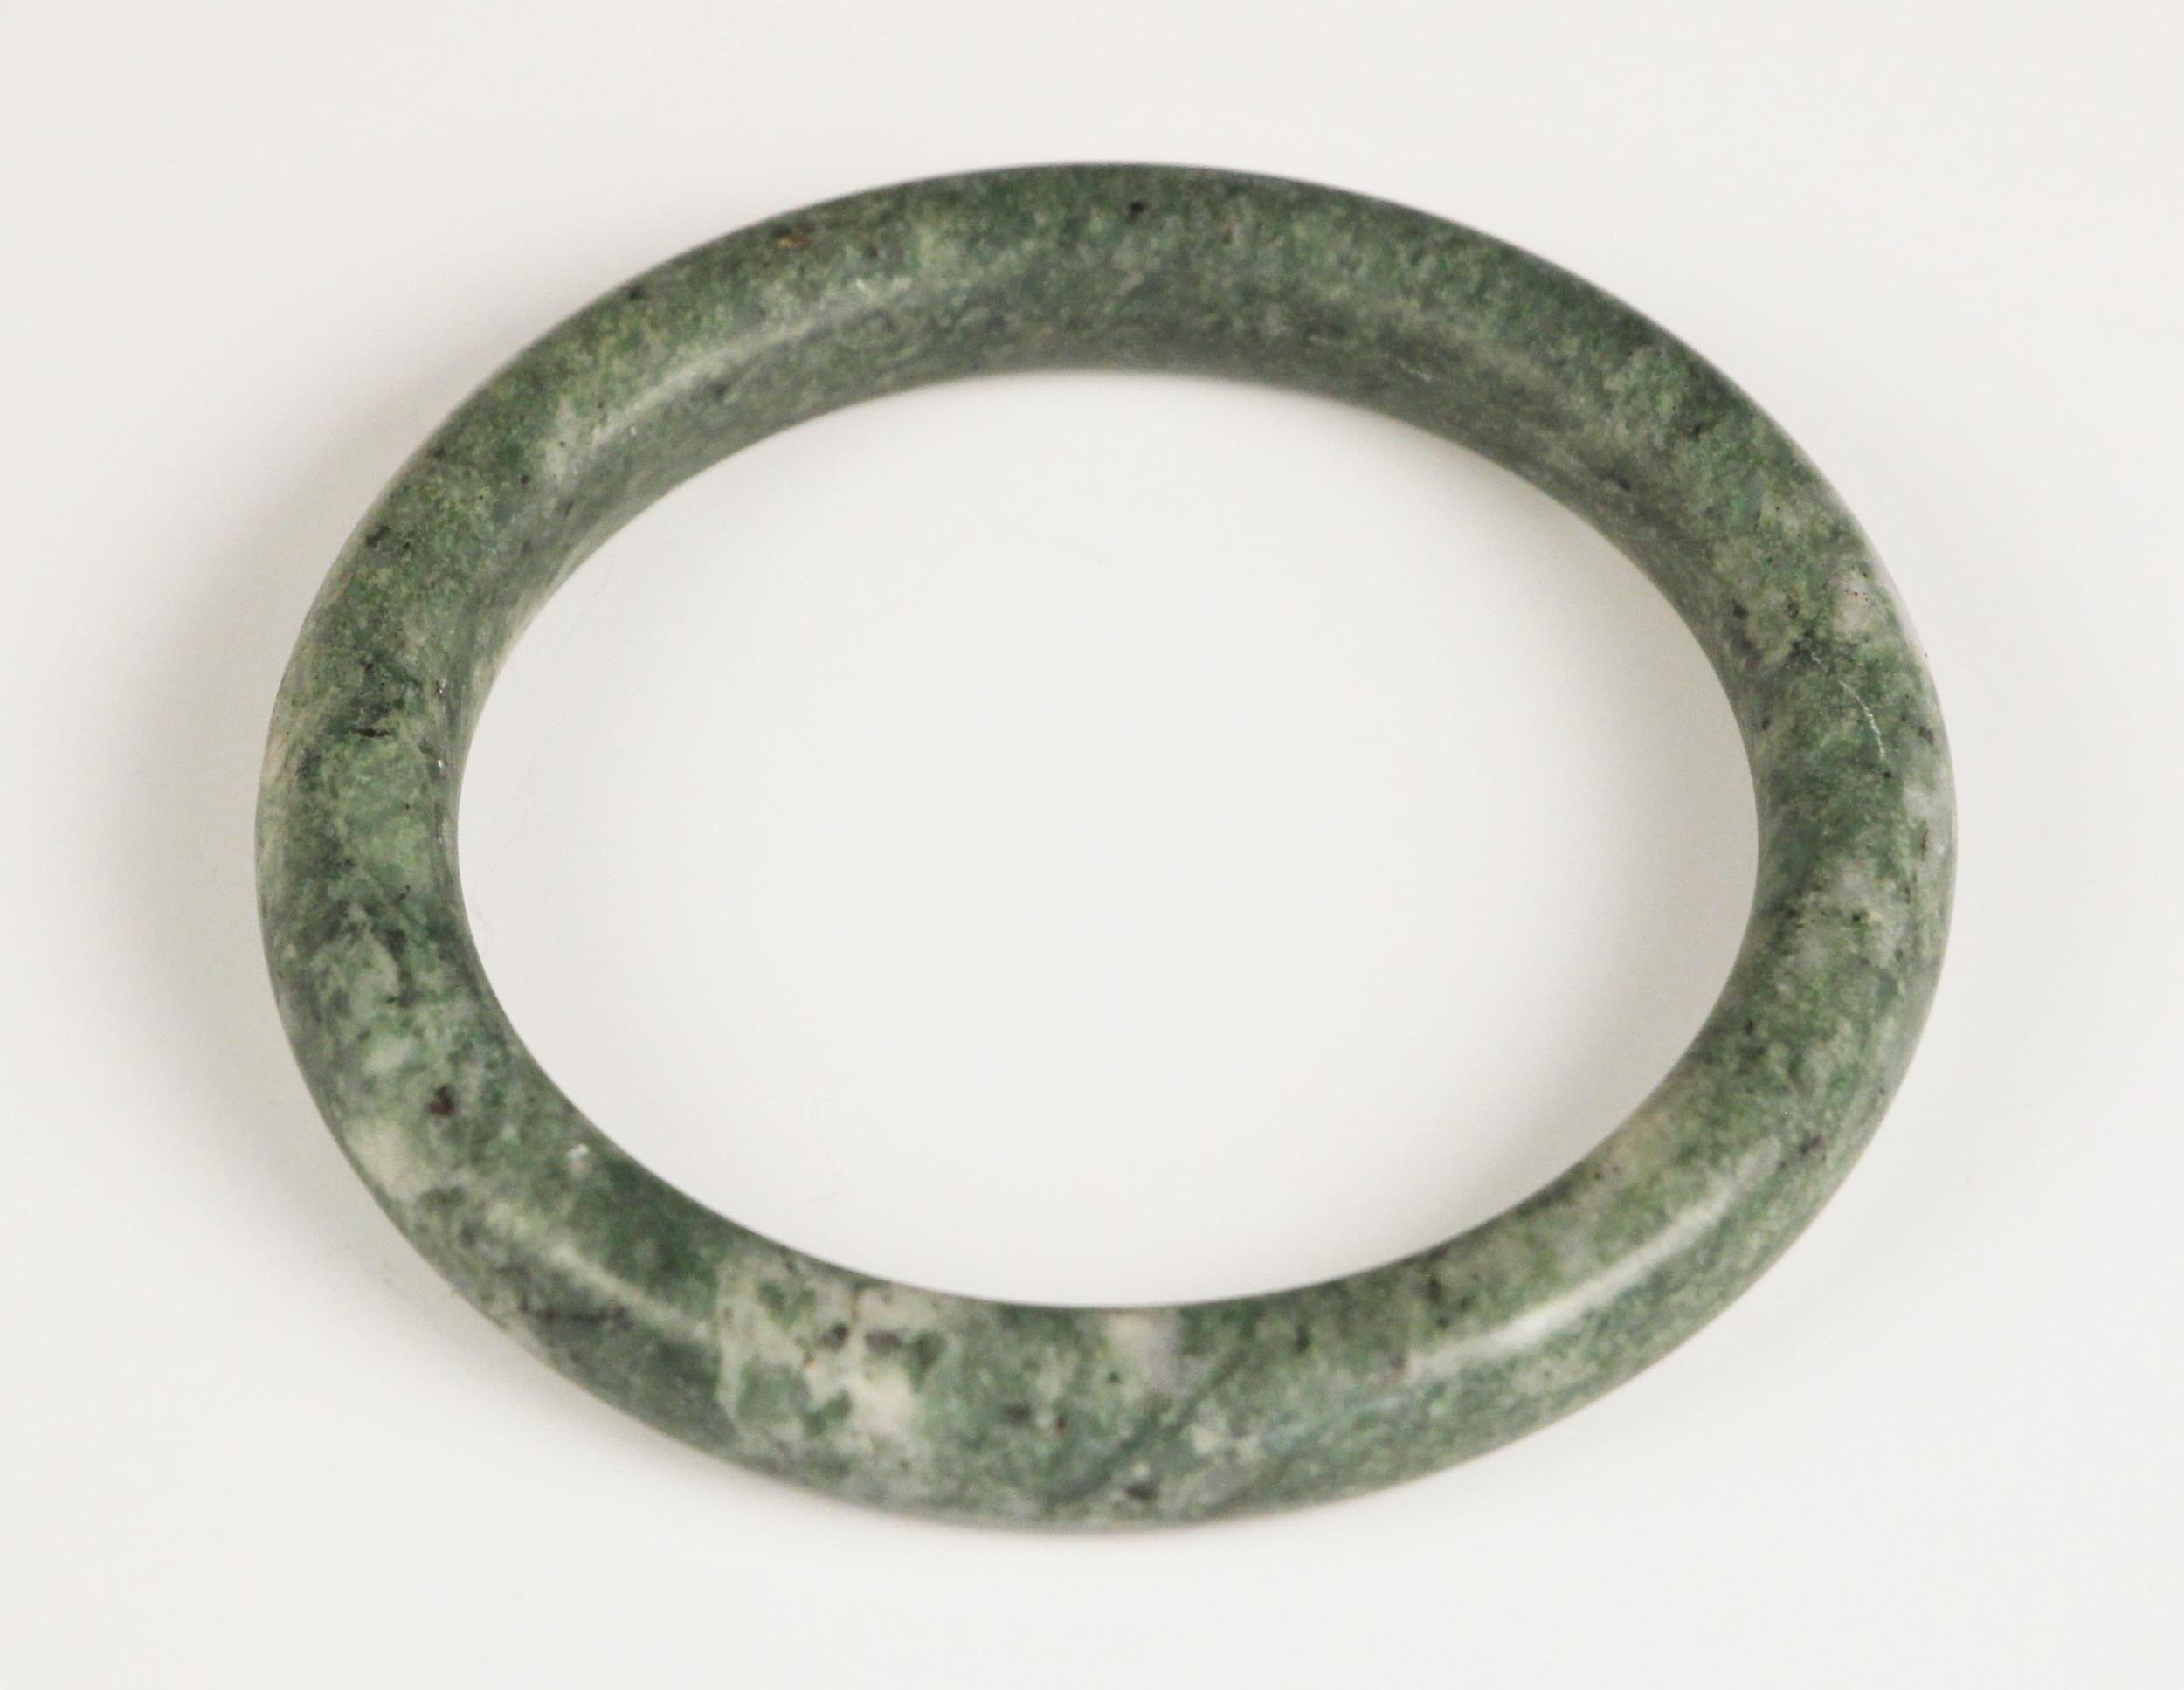 A Chinese polished Jade bangle, of plain polished spherical form, 7.5cm wide overall